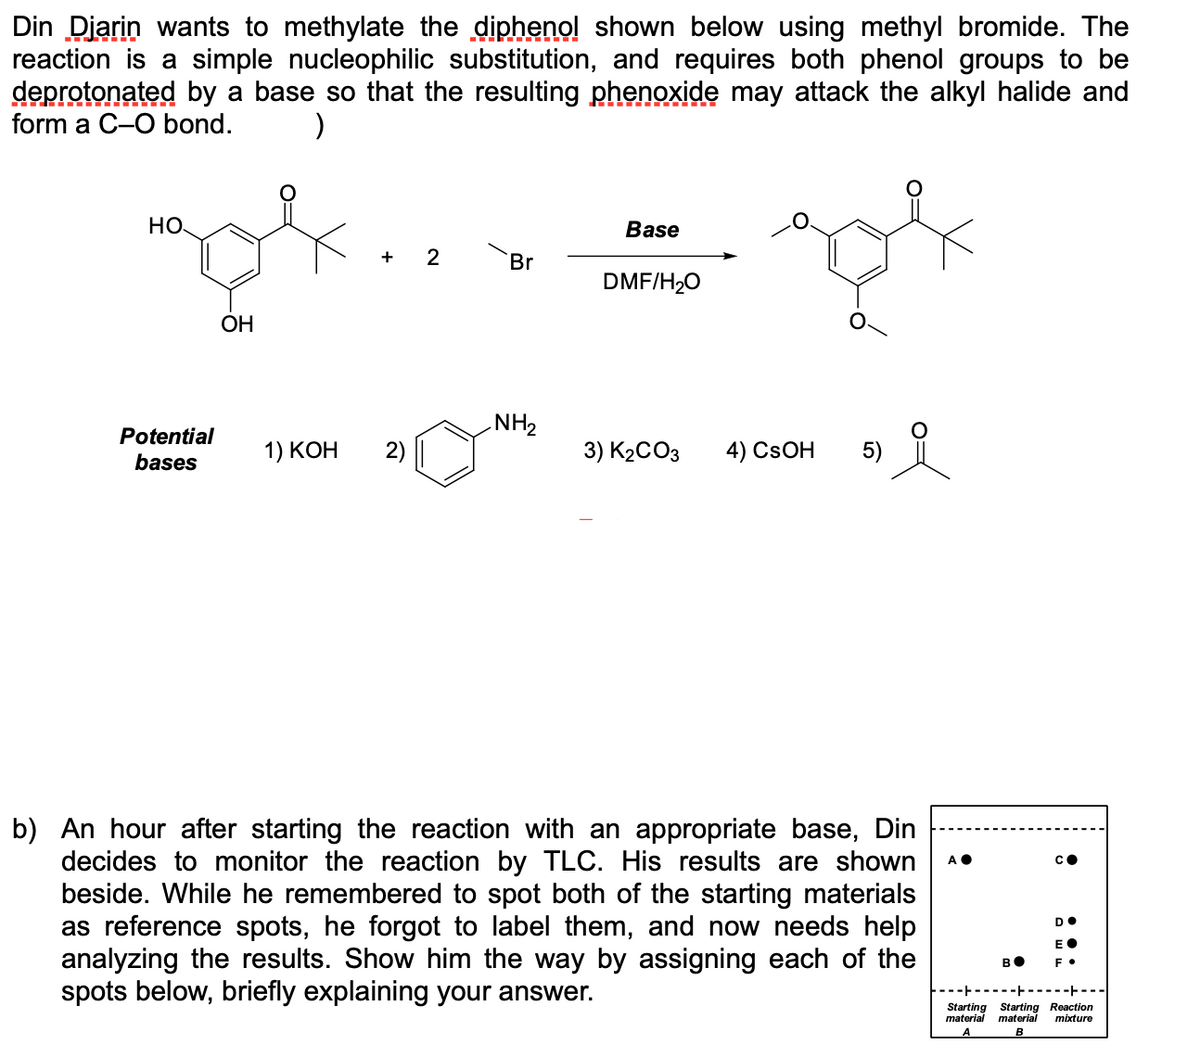 Din Diarin wants to methylate the diphenol shown below using methyl bromide. The
reaction is a simple nucleophilic substitution, and requires both phenol groups to be
deprotonated by a base so that the resulting phenoxide may attack the alkyl halide and
form a C-O bond.
)
Но
Base
+
Br
DMF/H20
ОН
NH2
Potential
1) КОН
2)
3) K2CO3
4) CSOH
5)
bases
b) An hour after starting the reaction with an appropriate base, Din
decides to monitor the reaction by TLC. His results are shown
beside. While he remembered to spot both of the starting materials
as reference spots, he forgot to label them, and now needs help
analyzing the results. Show him the way by assigning each of the
spots below, briefly explaining your answer.
DO
EO
во
Starting Starting Reaction
material
material
mixture
